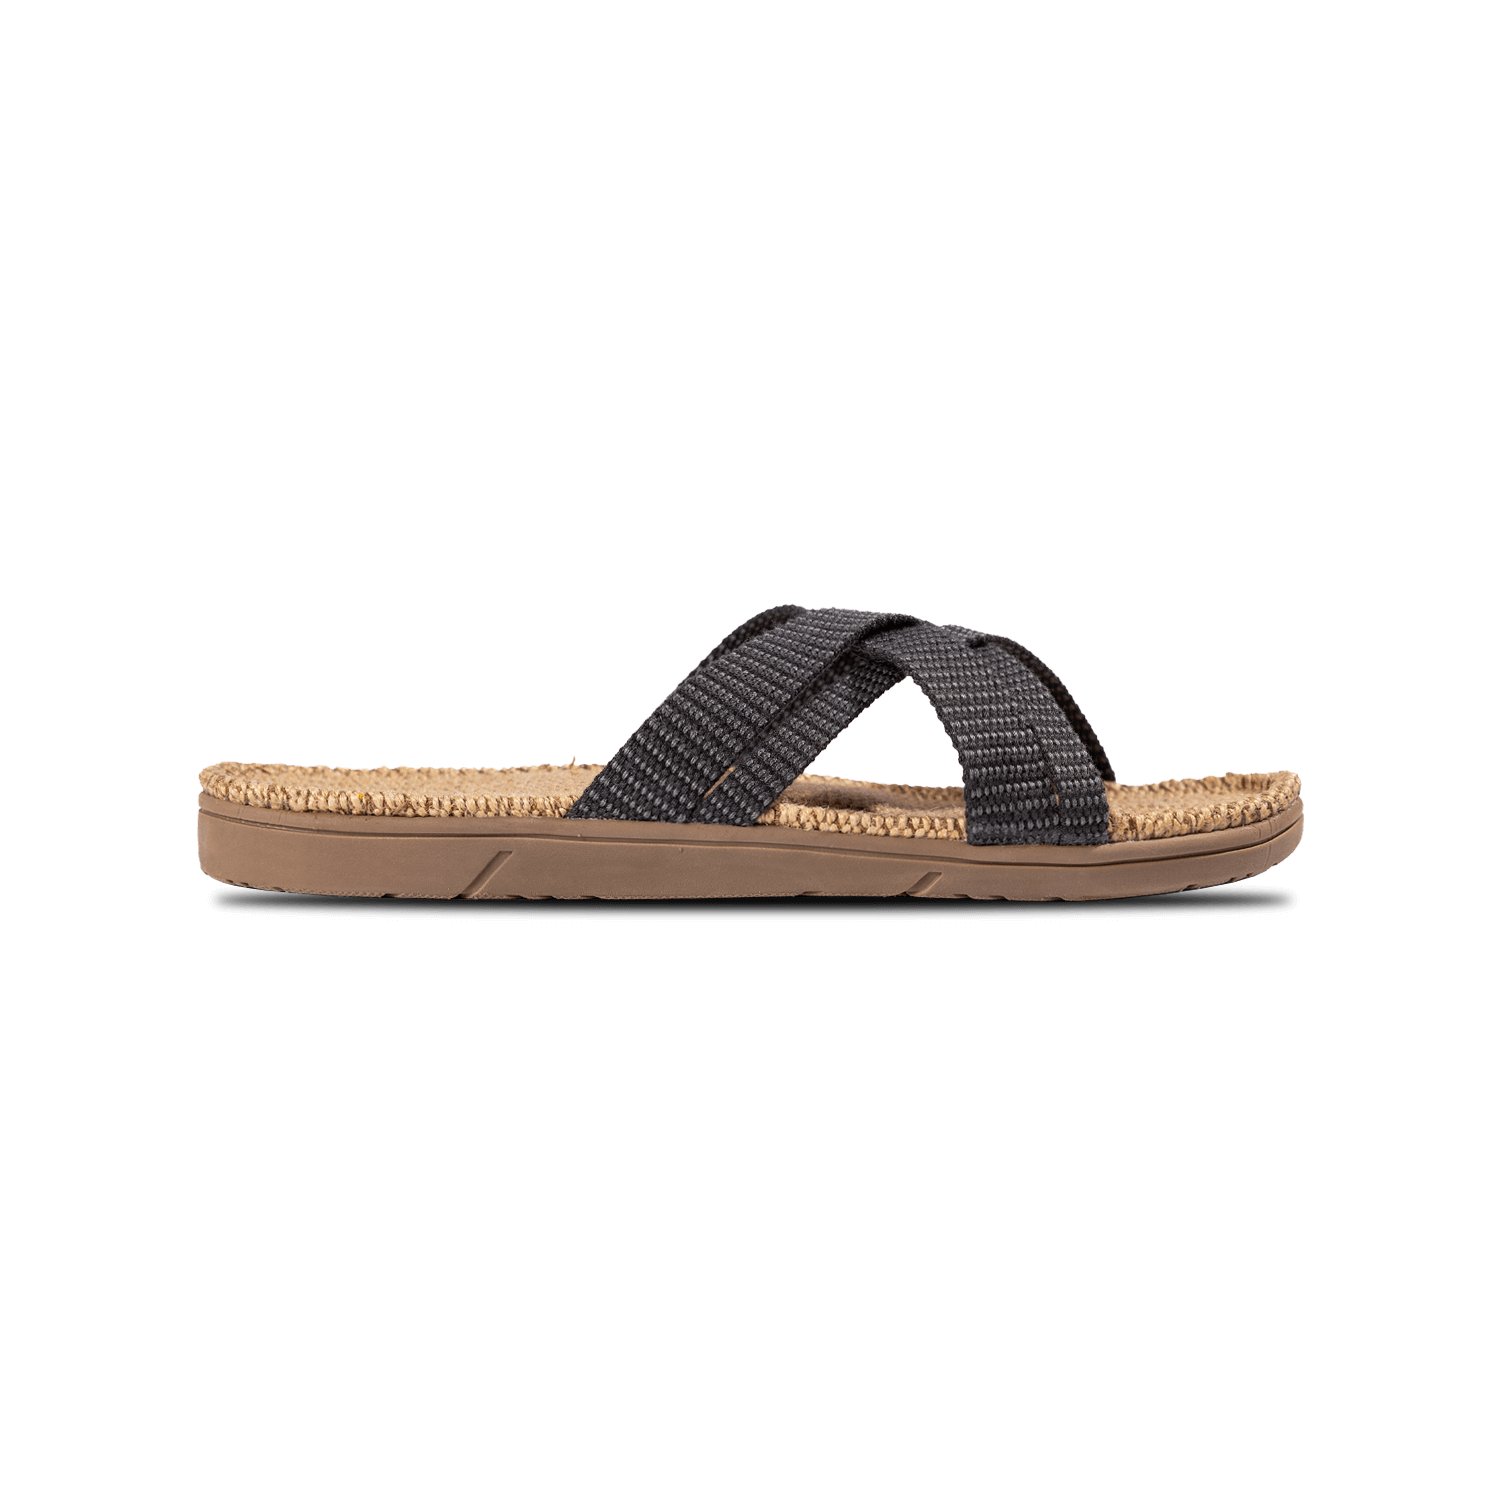 Danish Sandals - Womens #1 | Charcoal | Light Breathable Washable | by Shangies - Lifestory - Shangies by Stilov